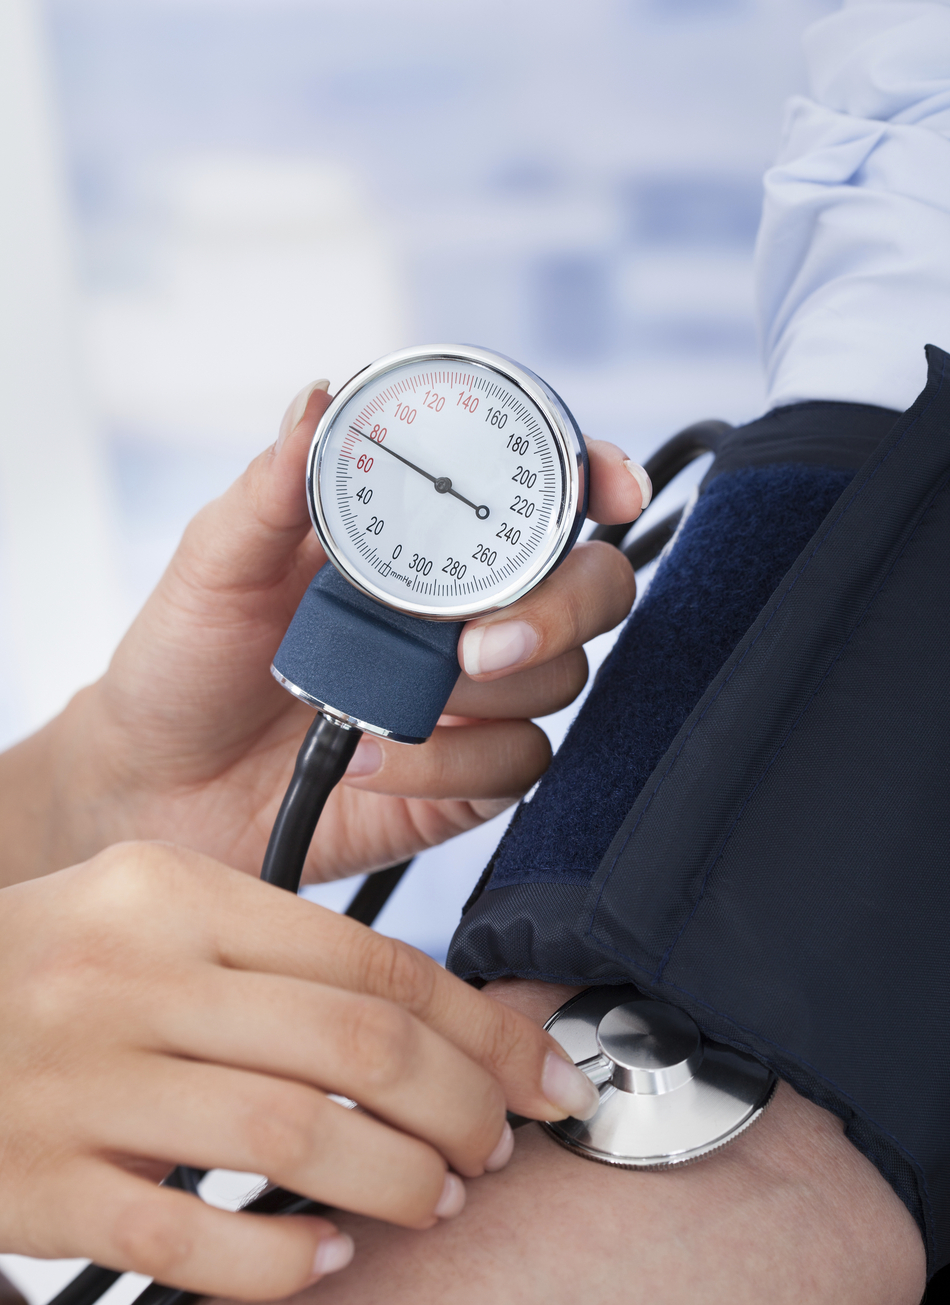 Medical Trial Suggests Systolic Blood Pressure of 120 or Less Could Benefit the Elderly